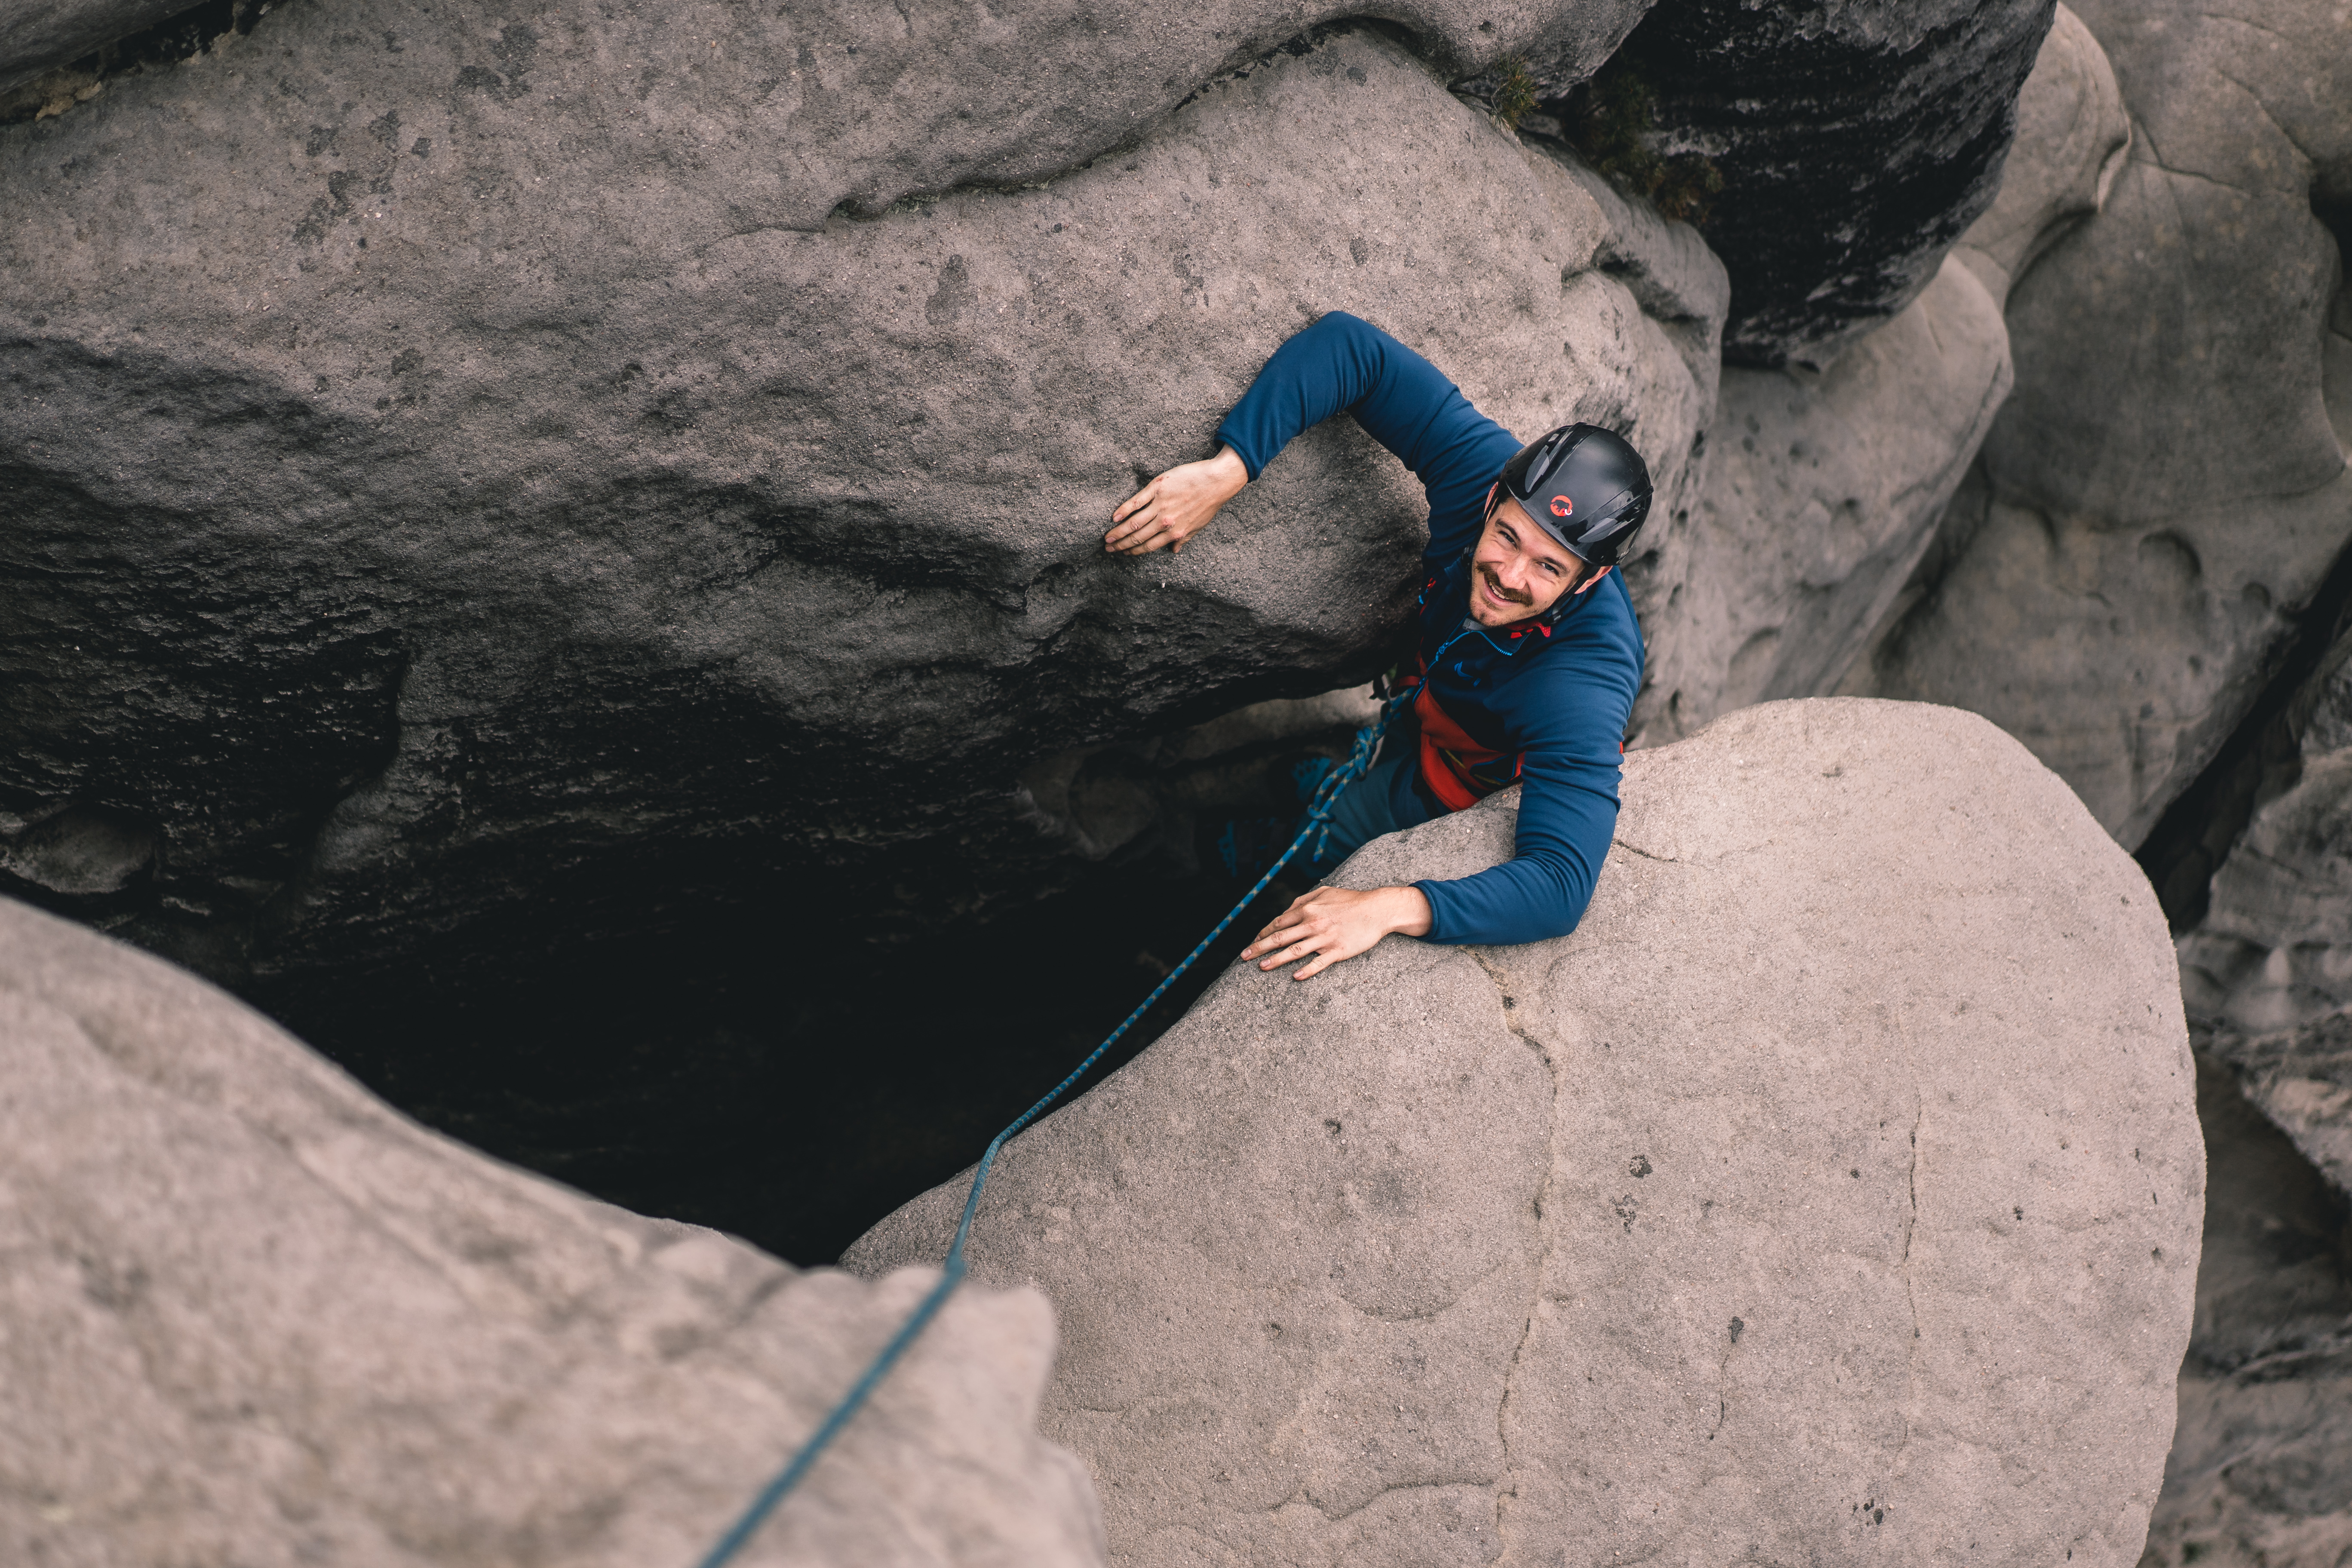 A rock climber demonstrating what layers to wear when climbing outdoors